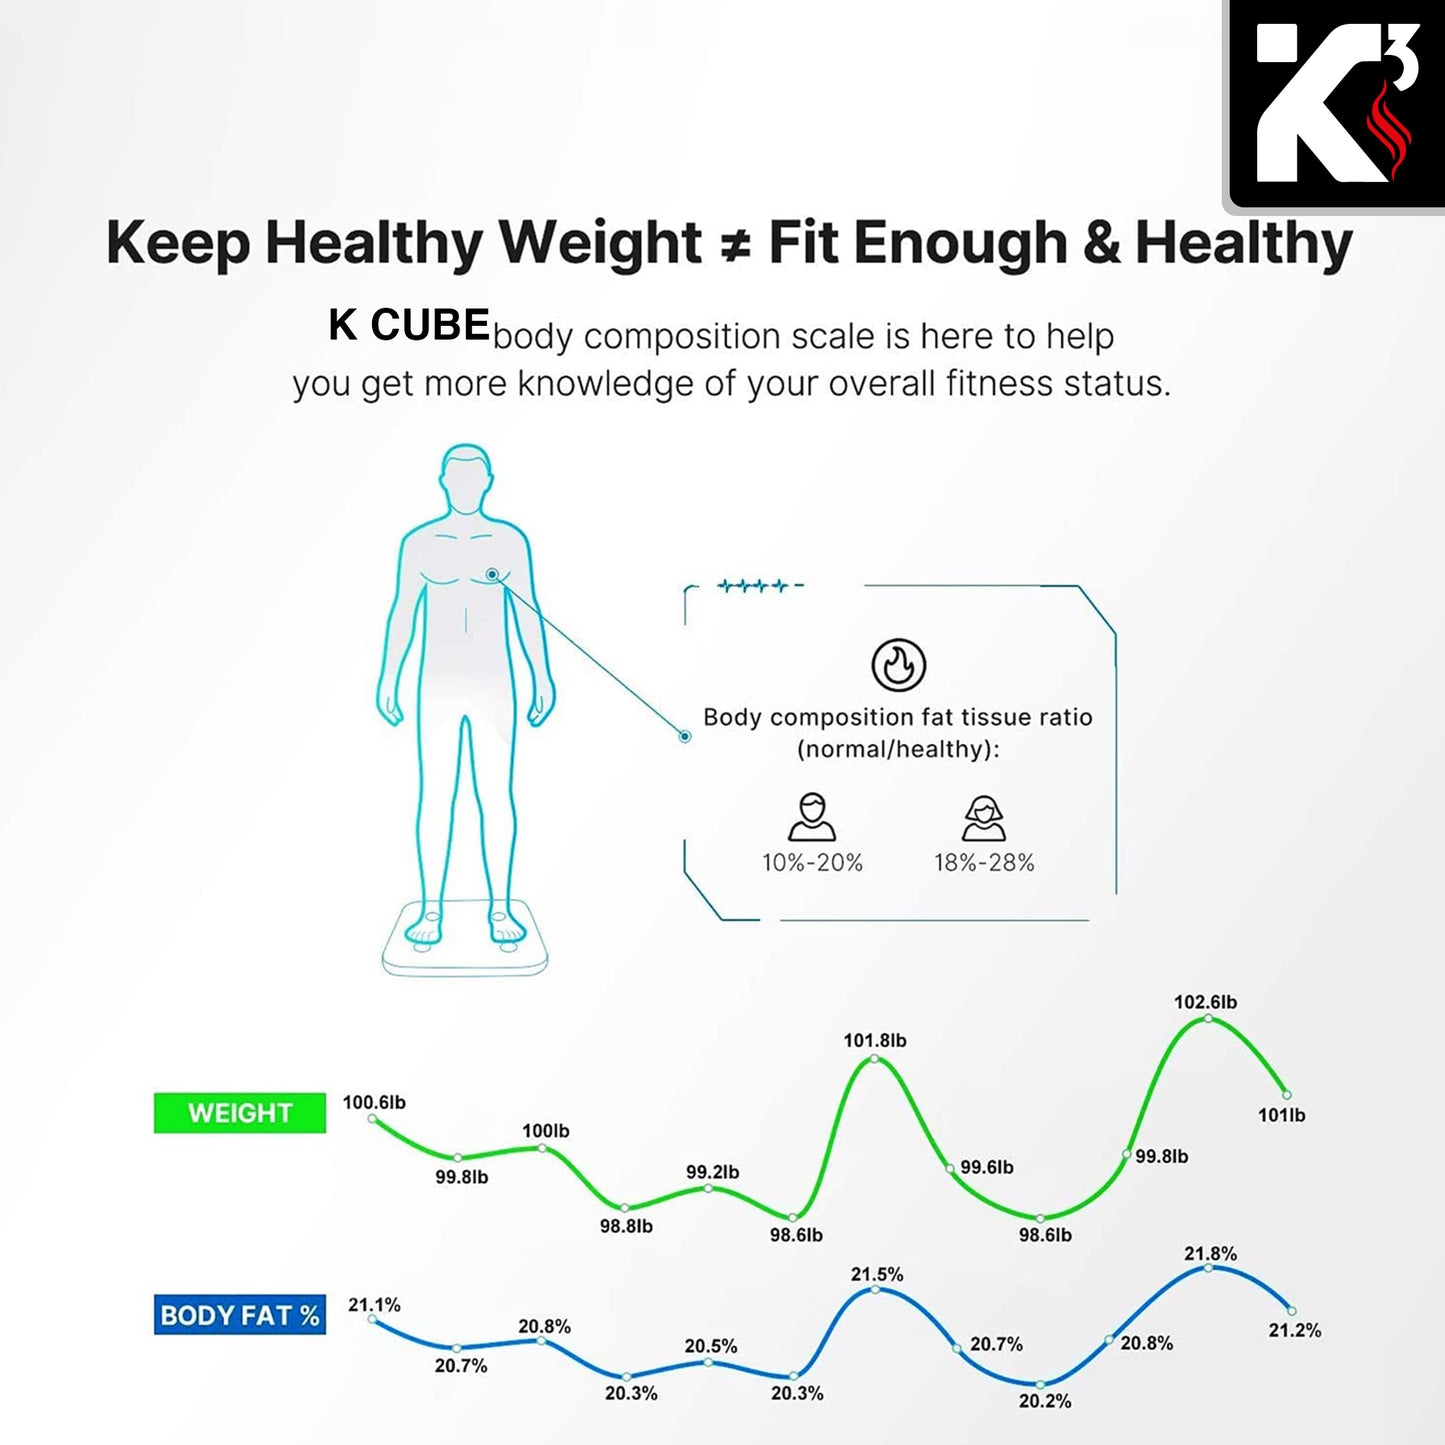 Kcubeinc Smart Digital Bathroom Weighing Scale with Body Fat and Water Weight for People, Bluetooth BMI Electronic Body Analyzer Machine, 400 lbs. BBS VL B BLK